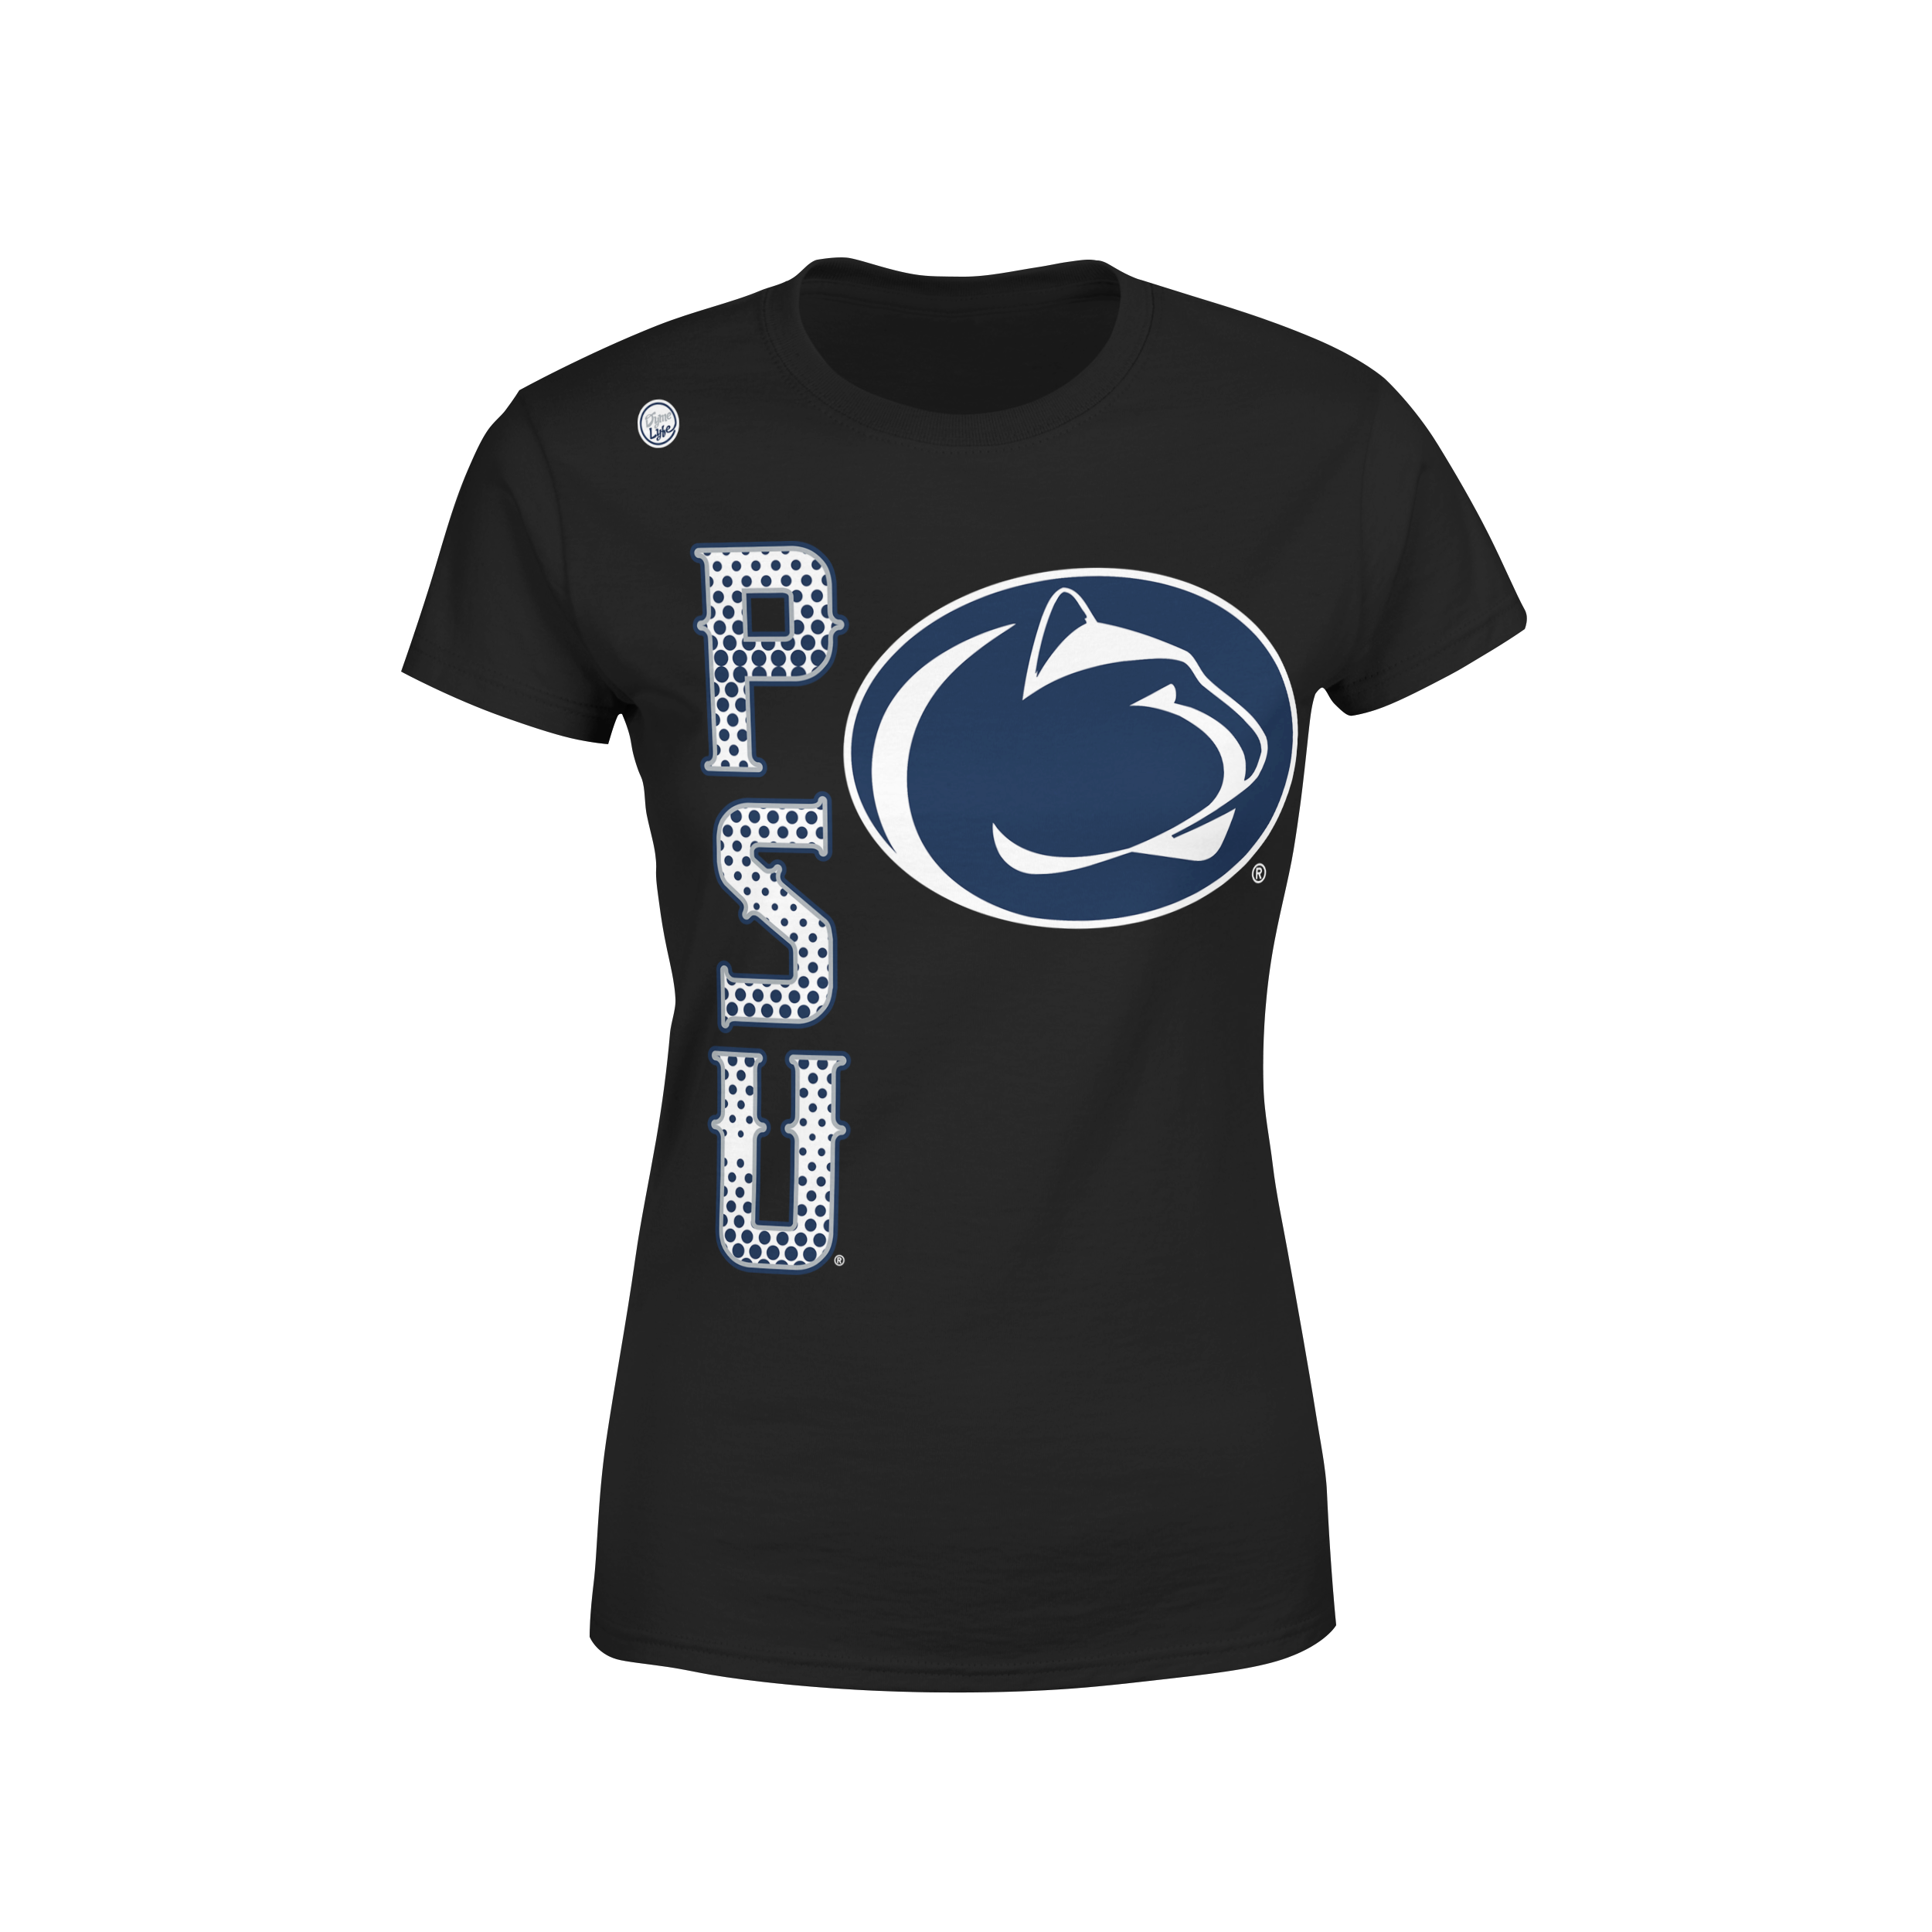 Penn State Nittany Lions Women’s Ace Tee